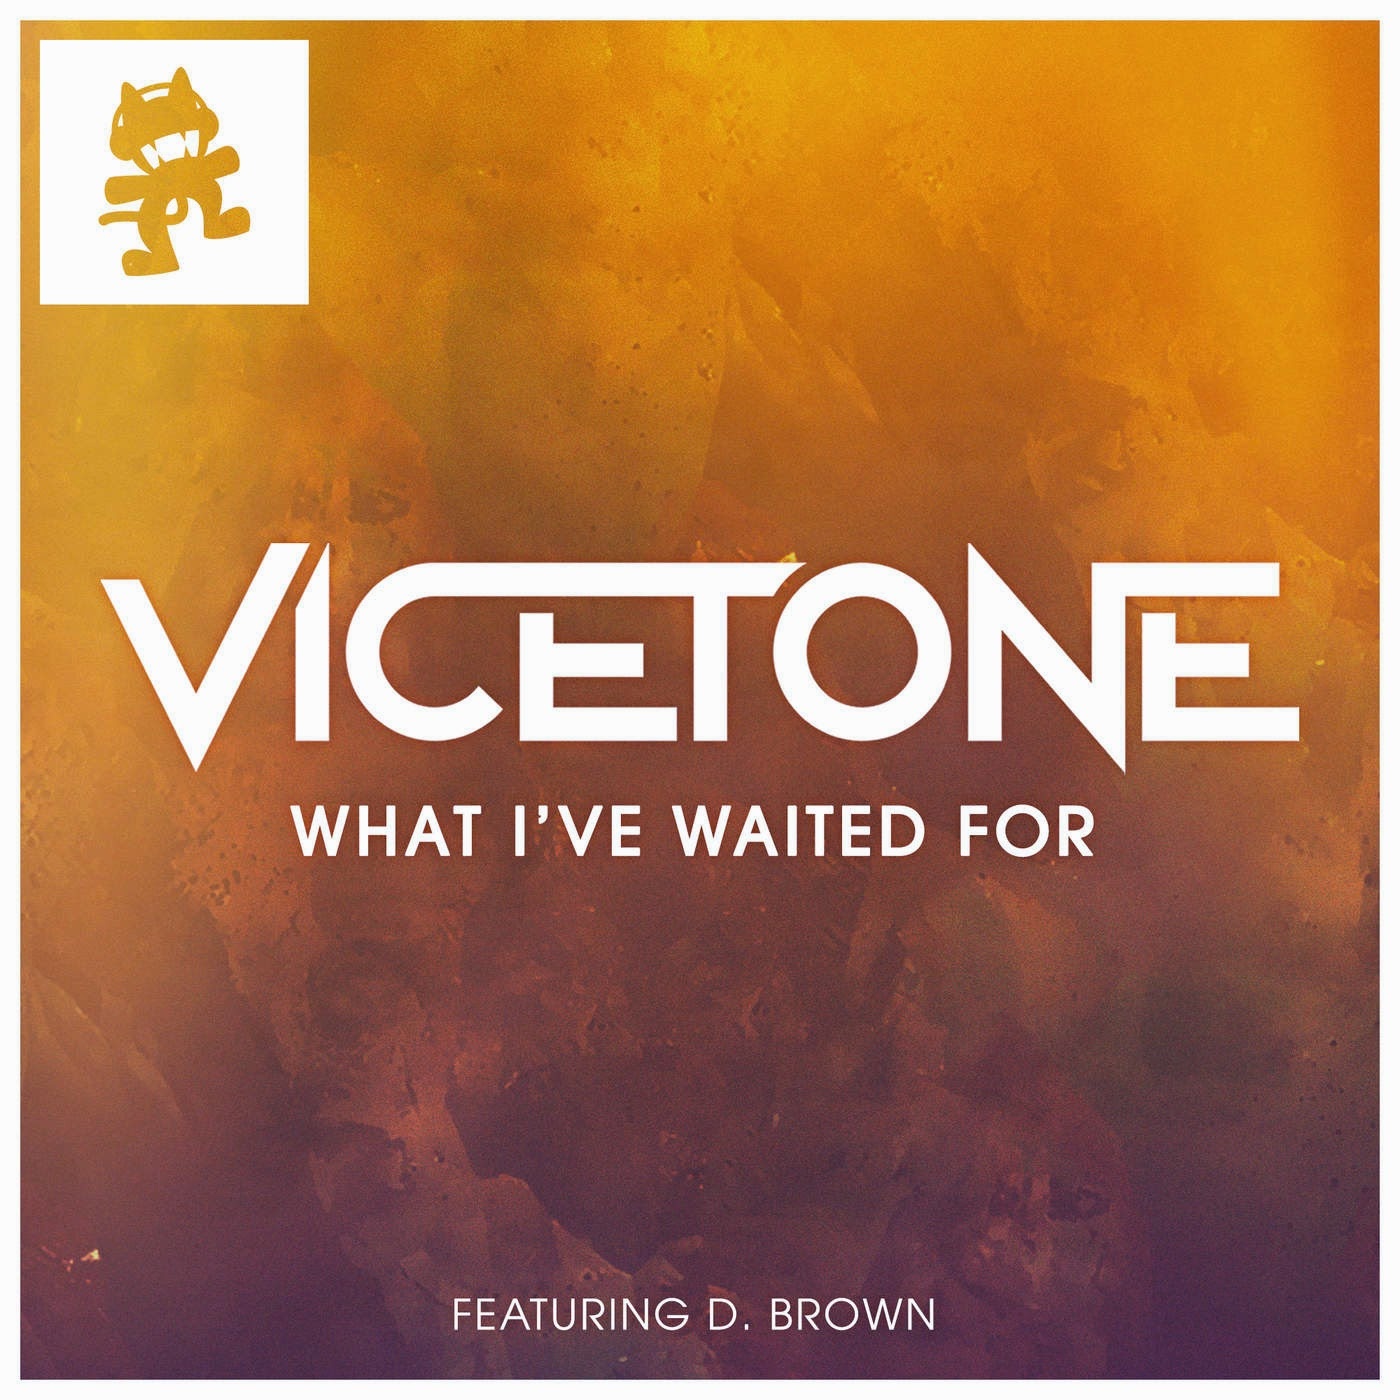 What I've Waited For (Original Mix)